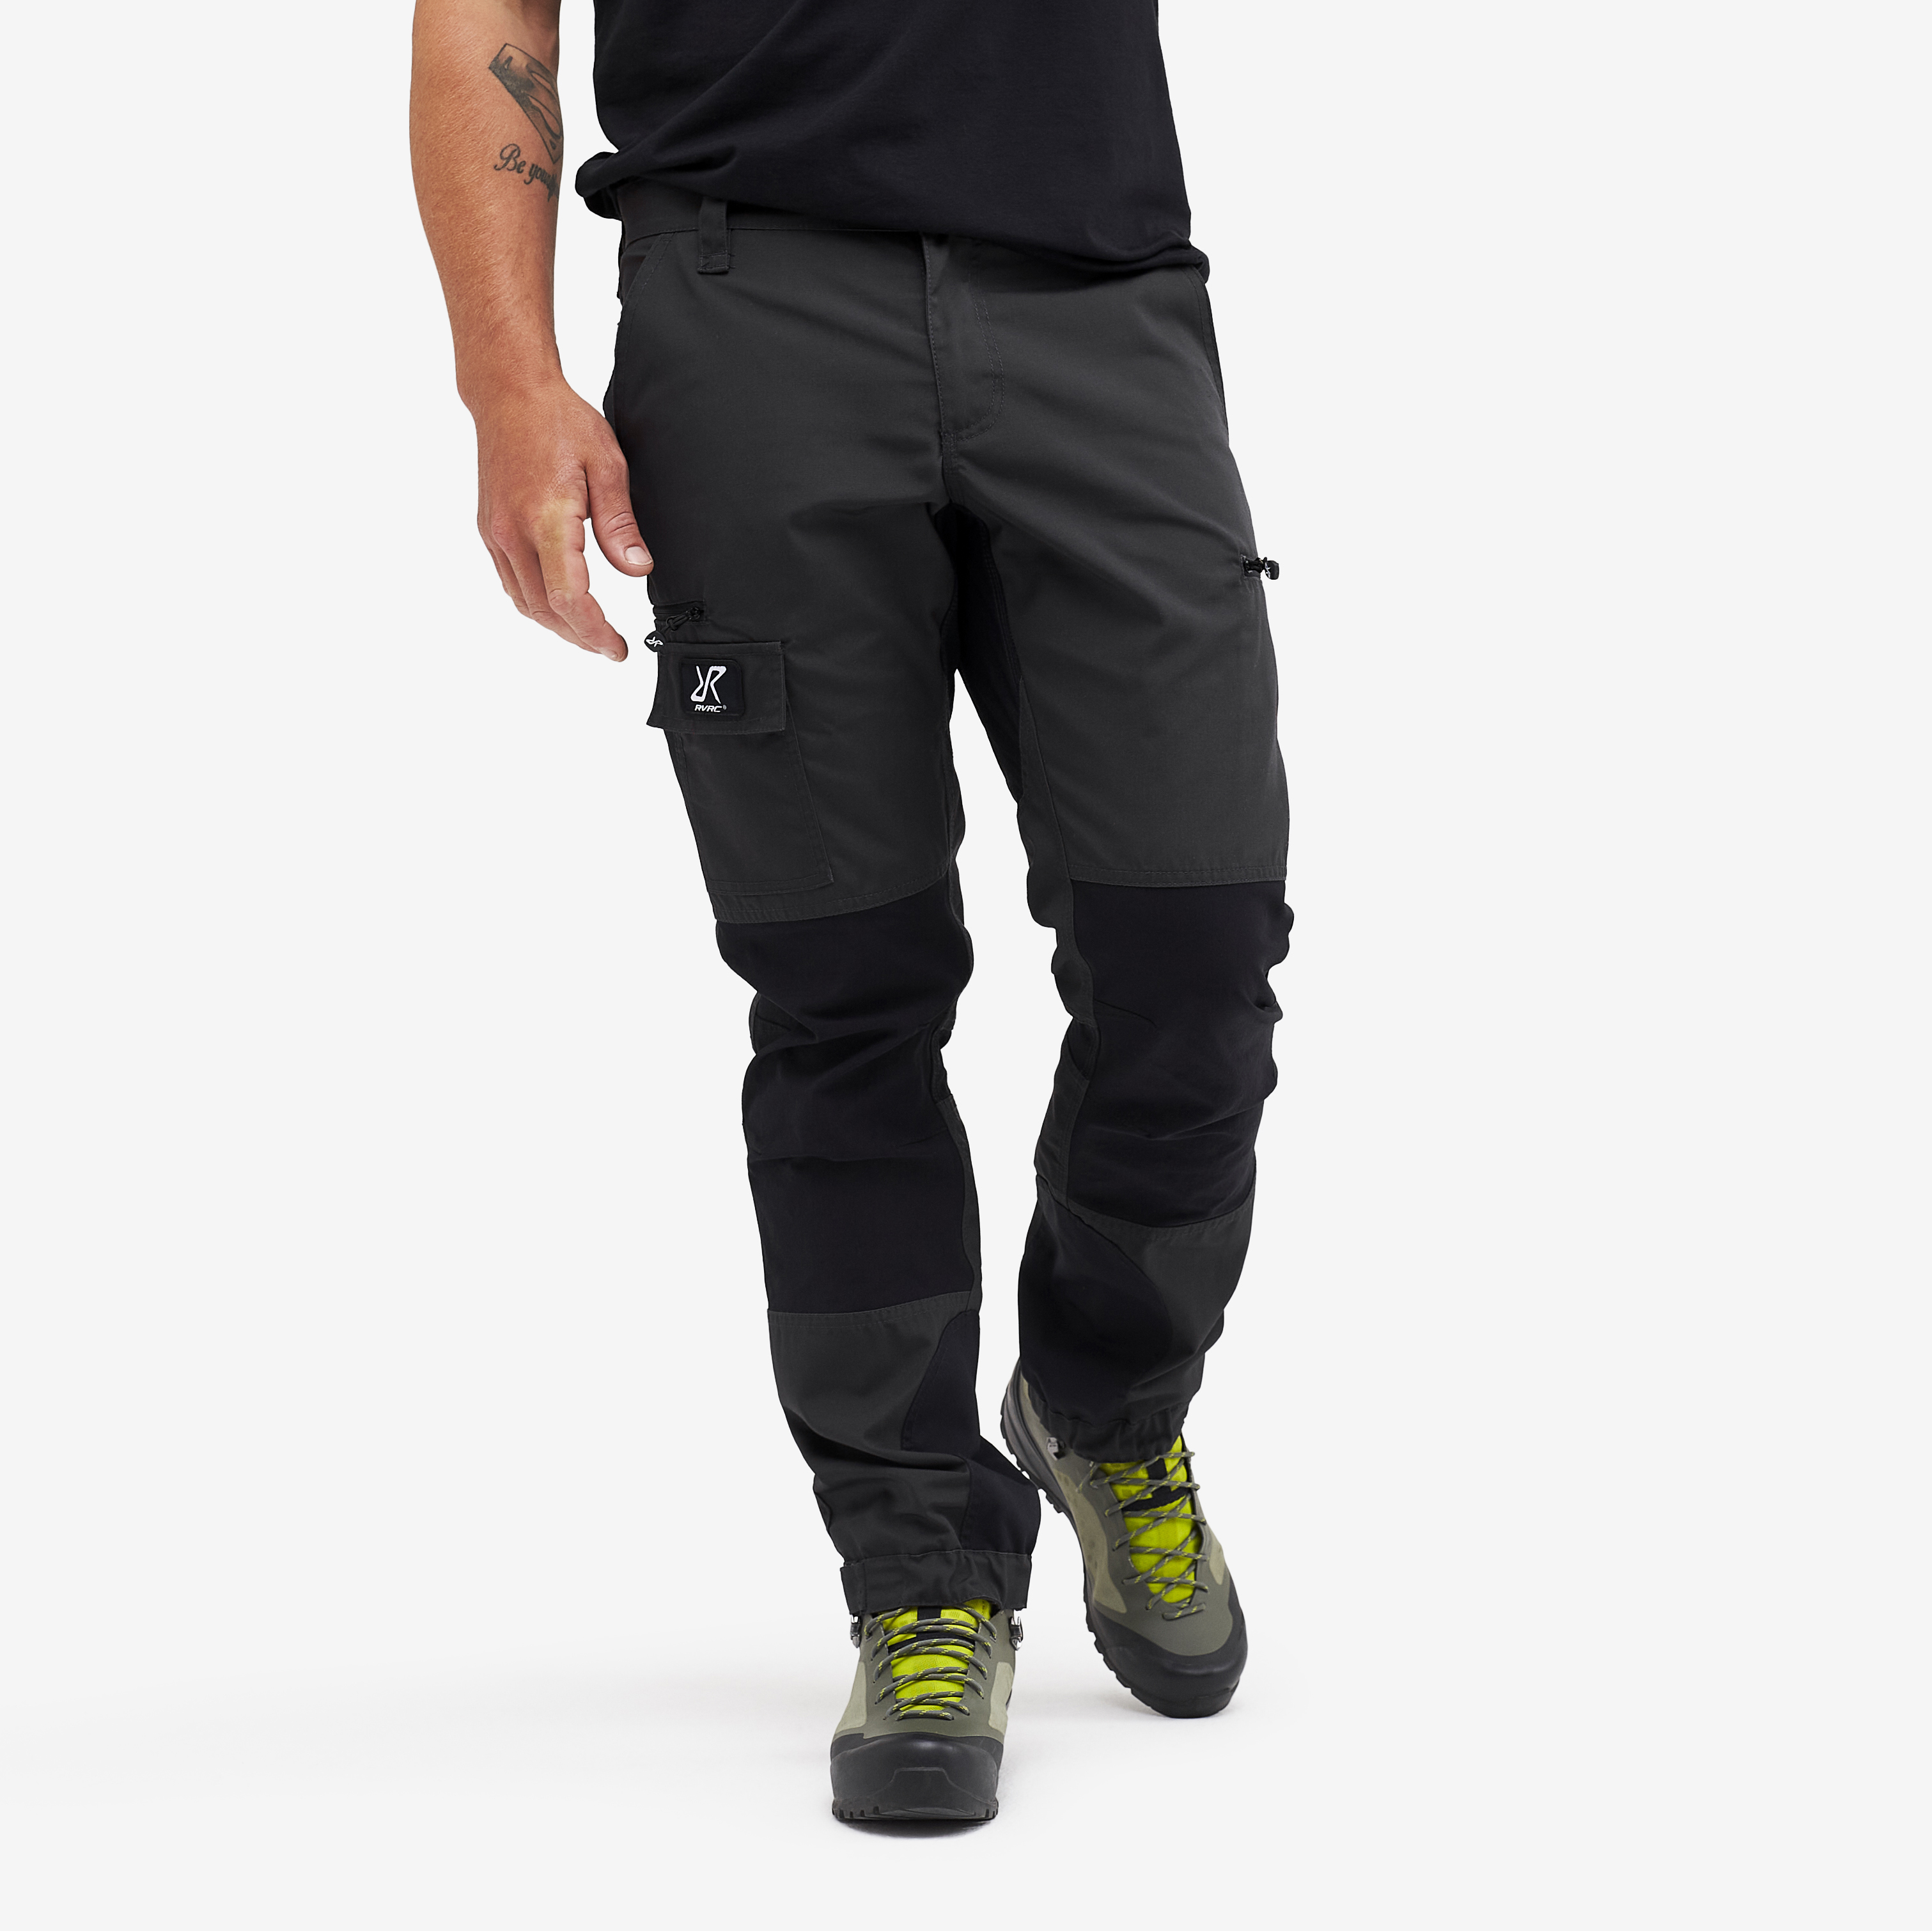 Nordwand Short Pants Anthracite Herre